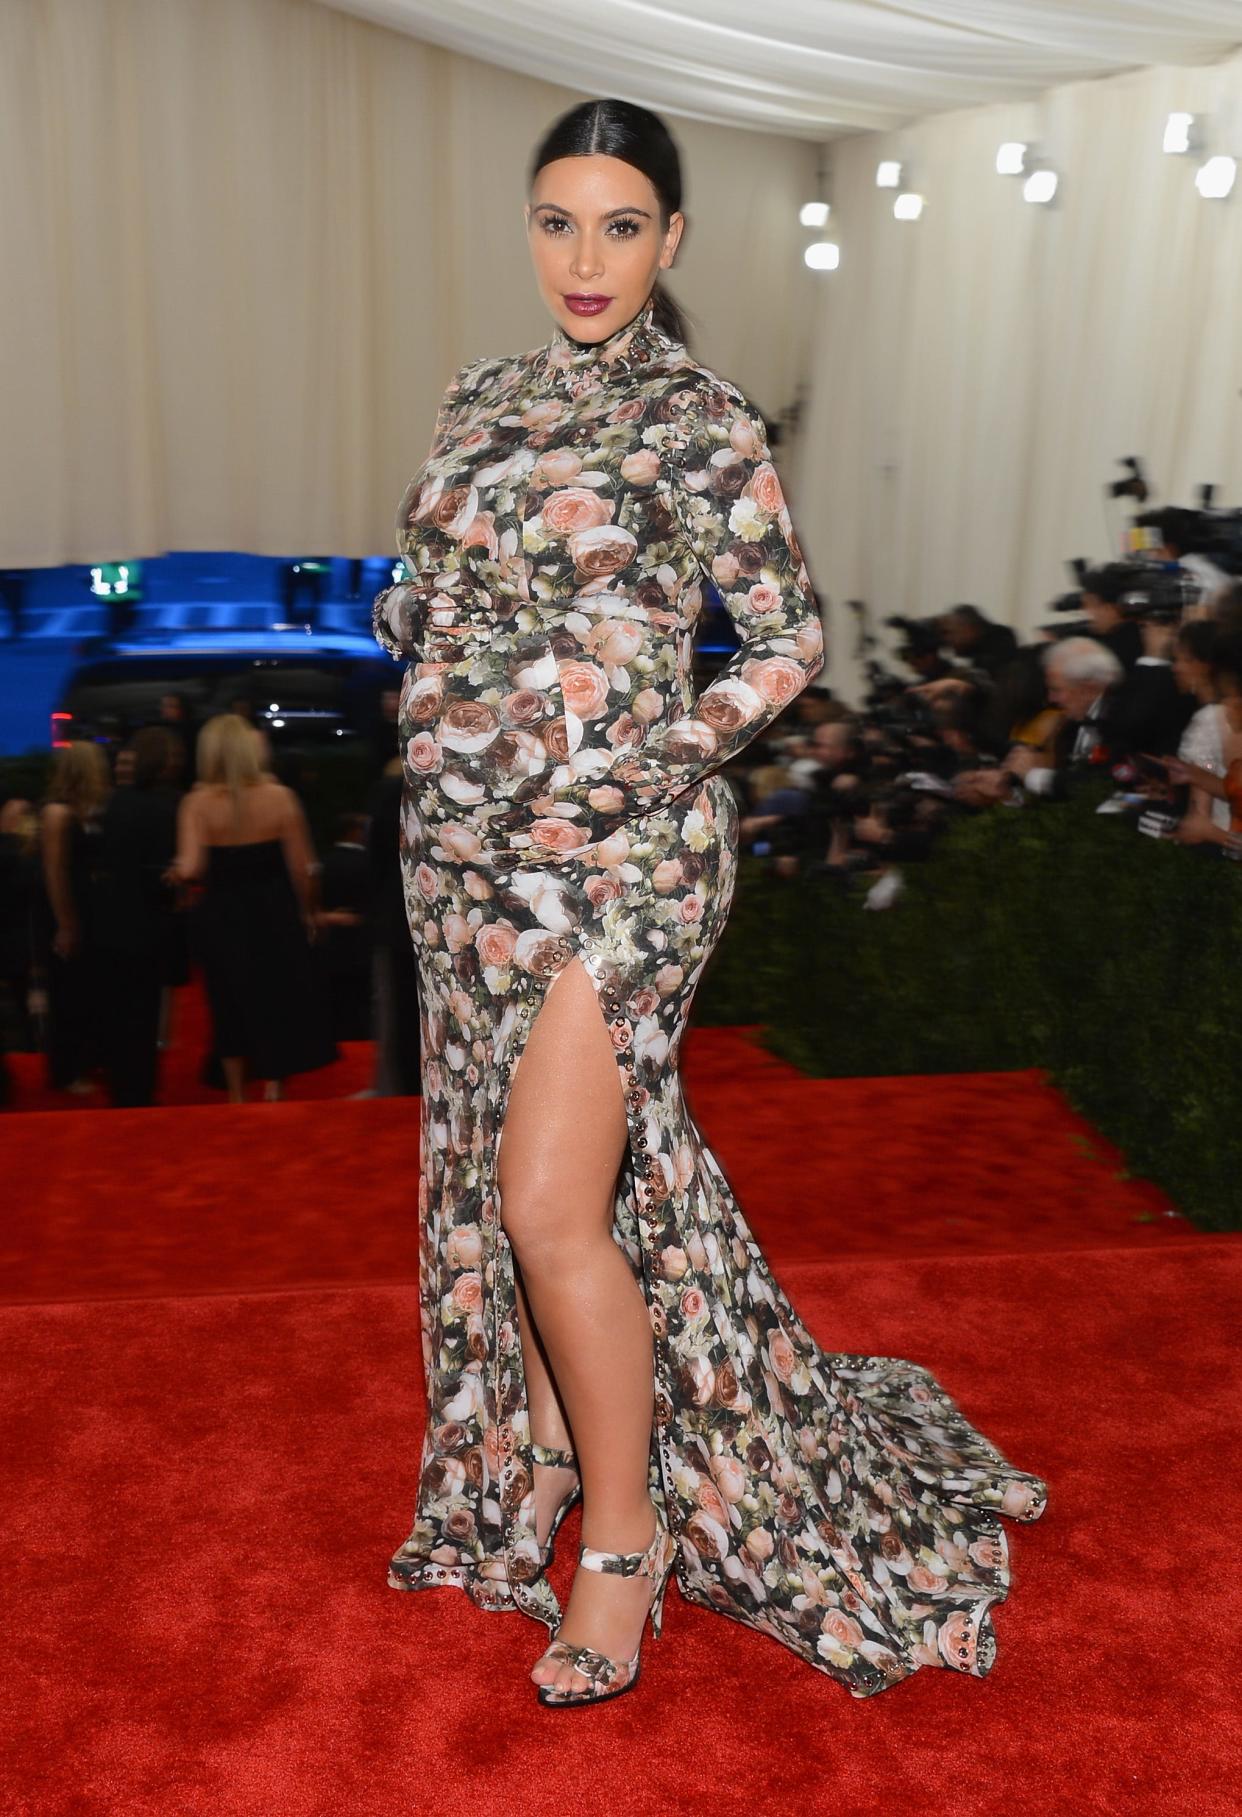 Kim Kardashian attends the 2013 Met Gala. She's pregnant and wearing a floral gown with a thigh-high slit.